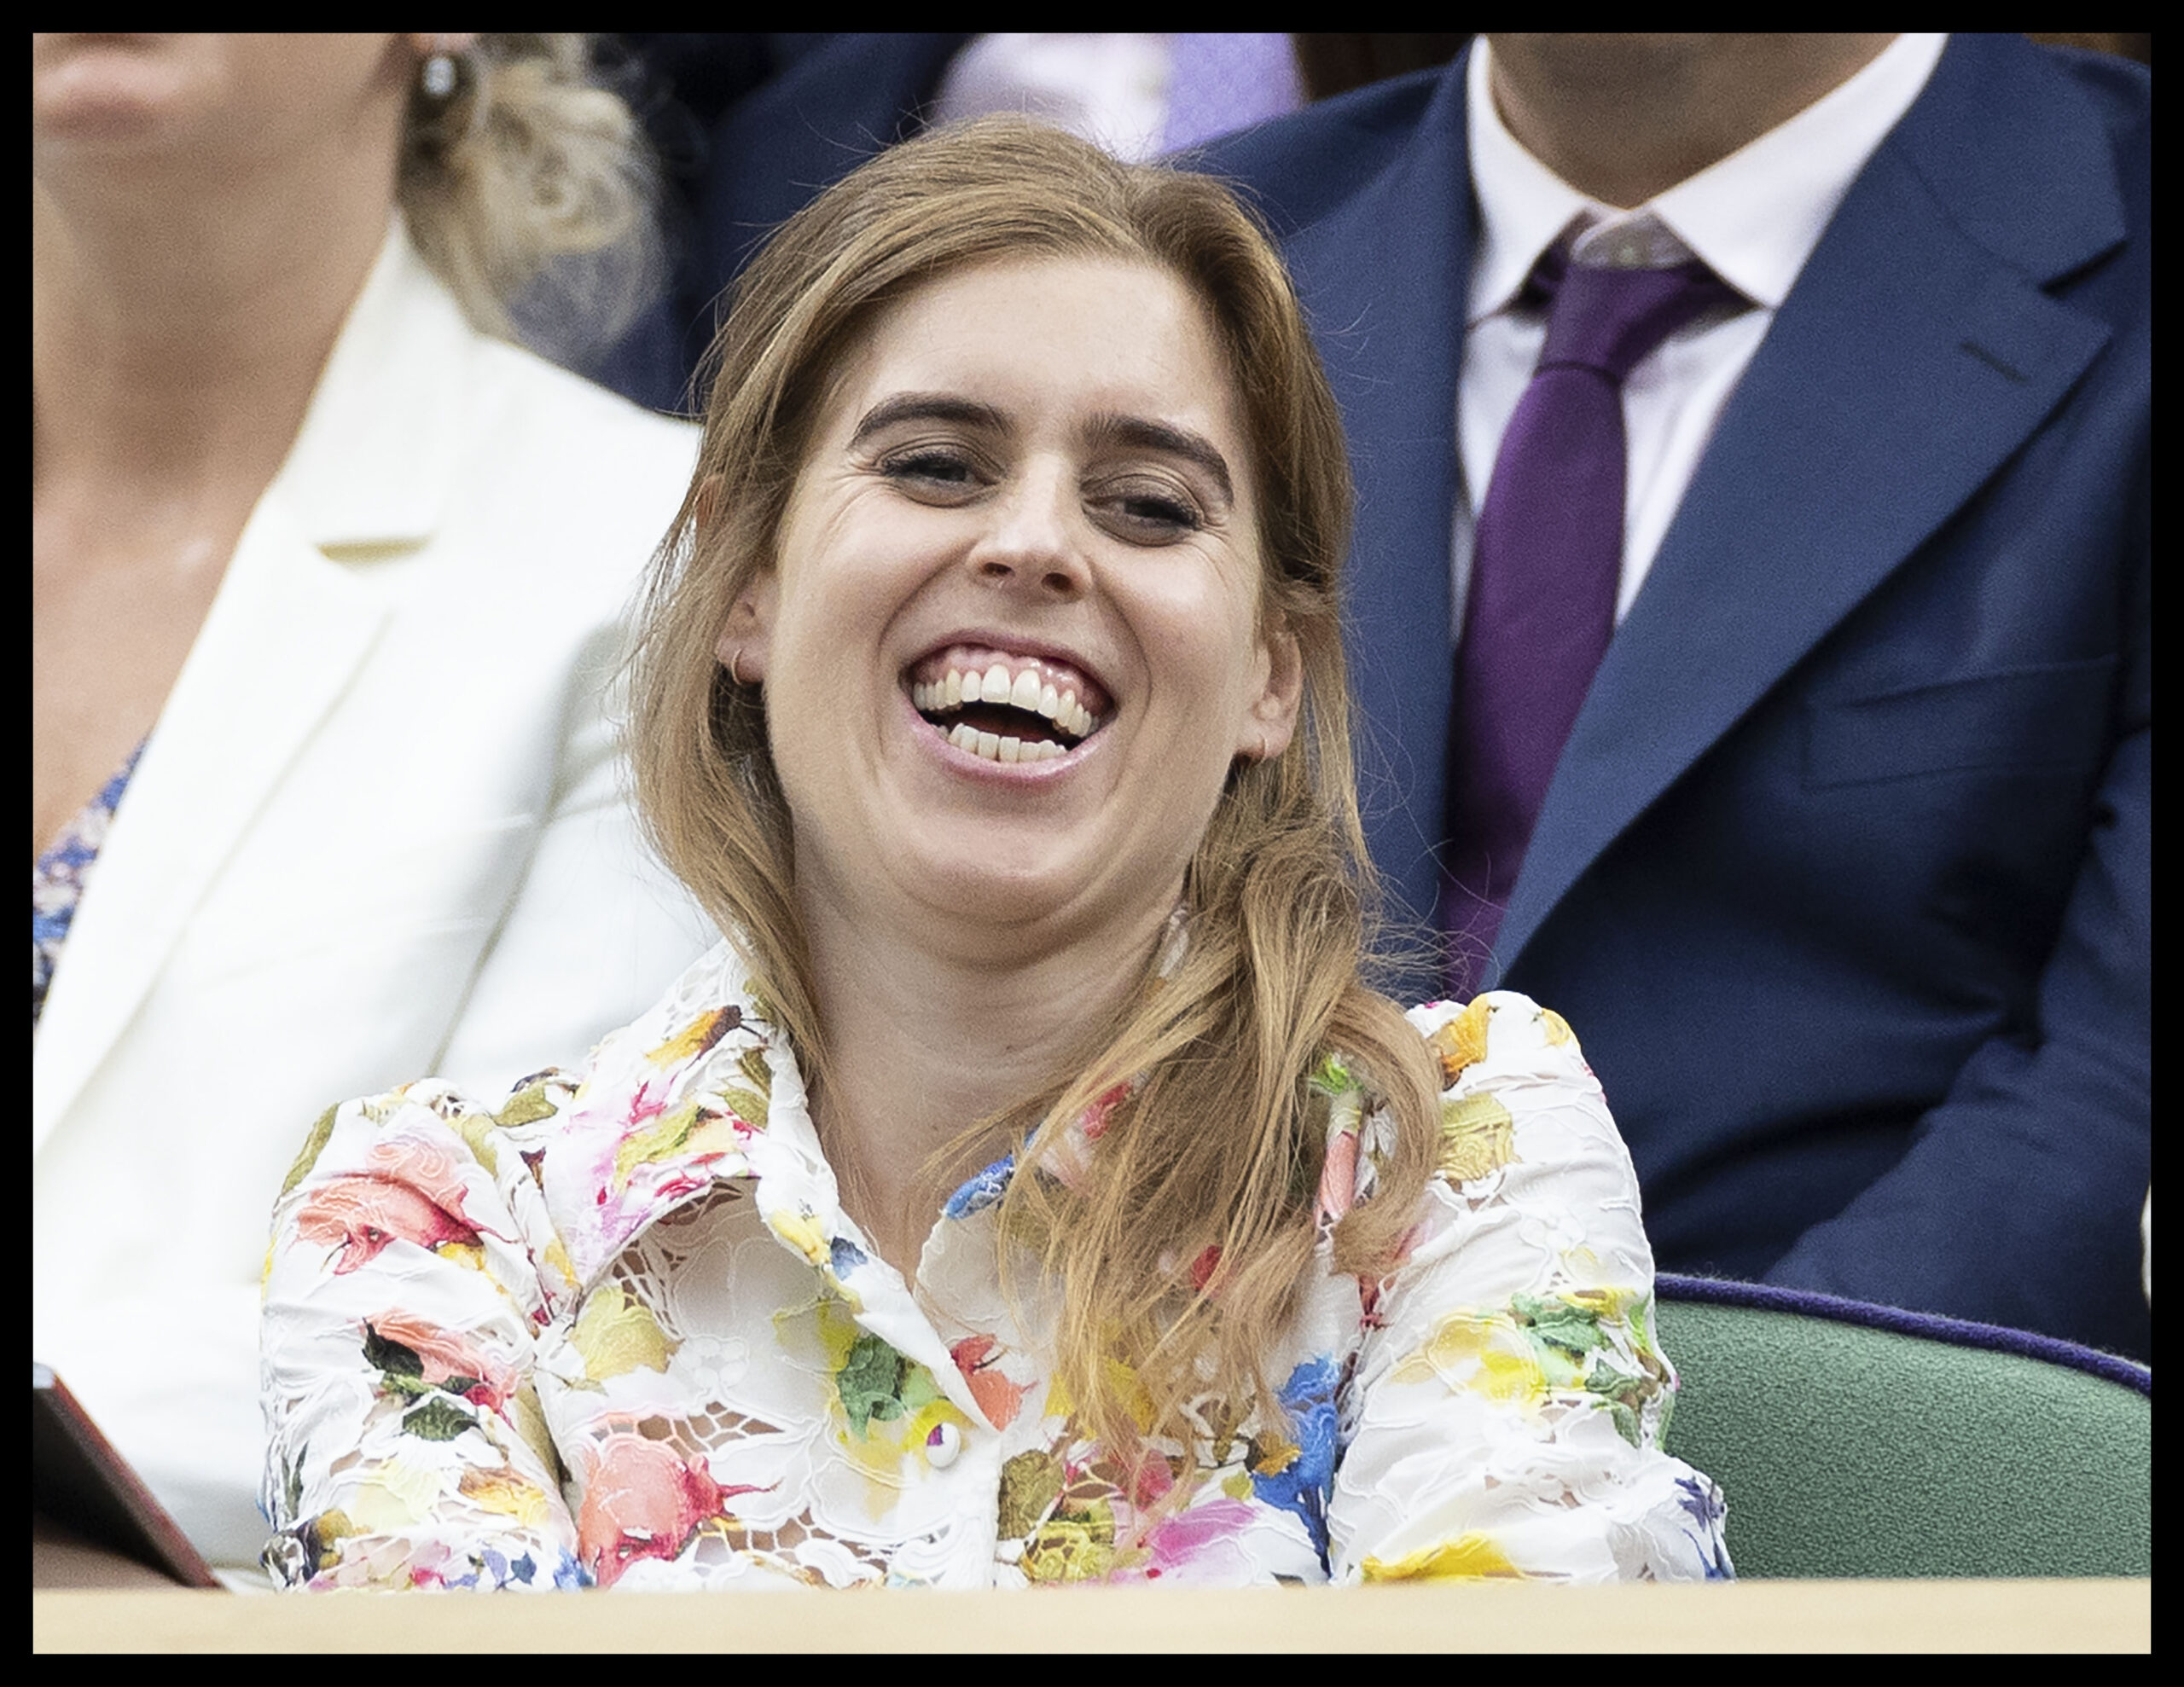 Princess Beatrice is all smiles at Wimbledon as she joins The King’s cousin in royal box